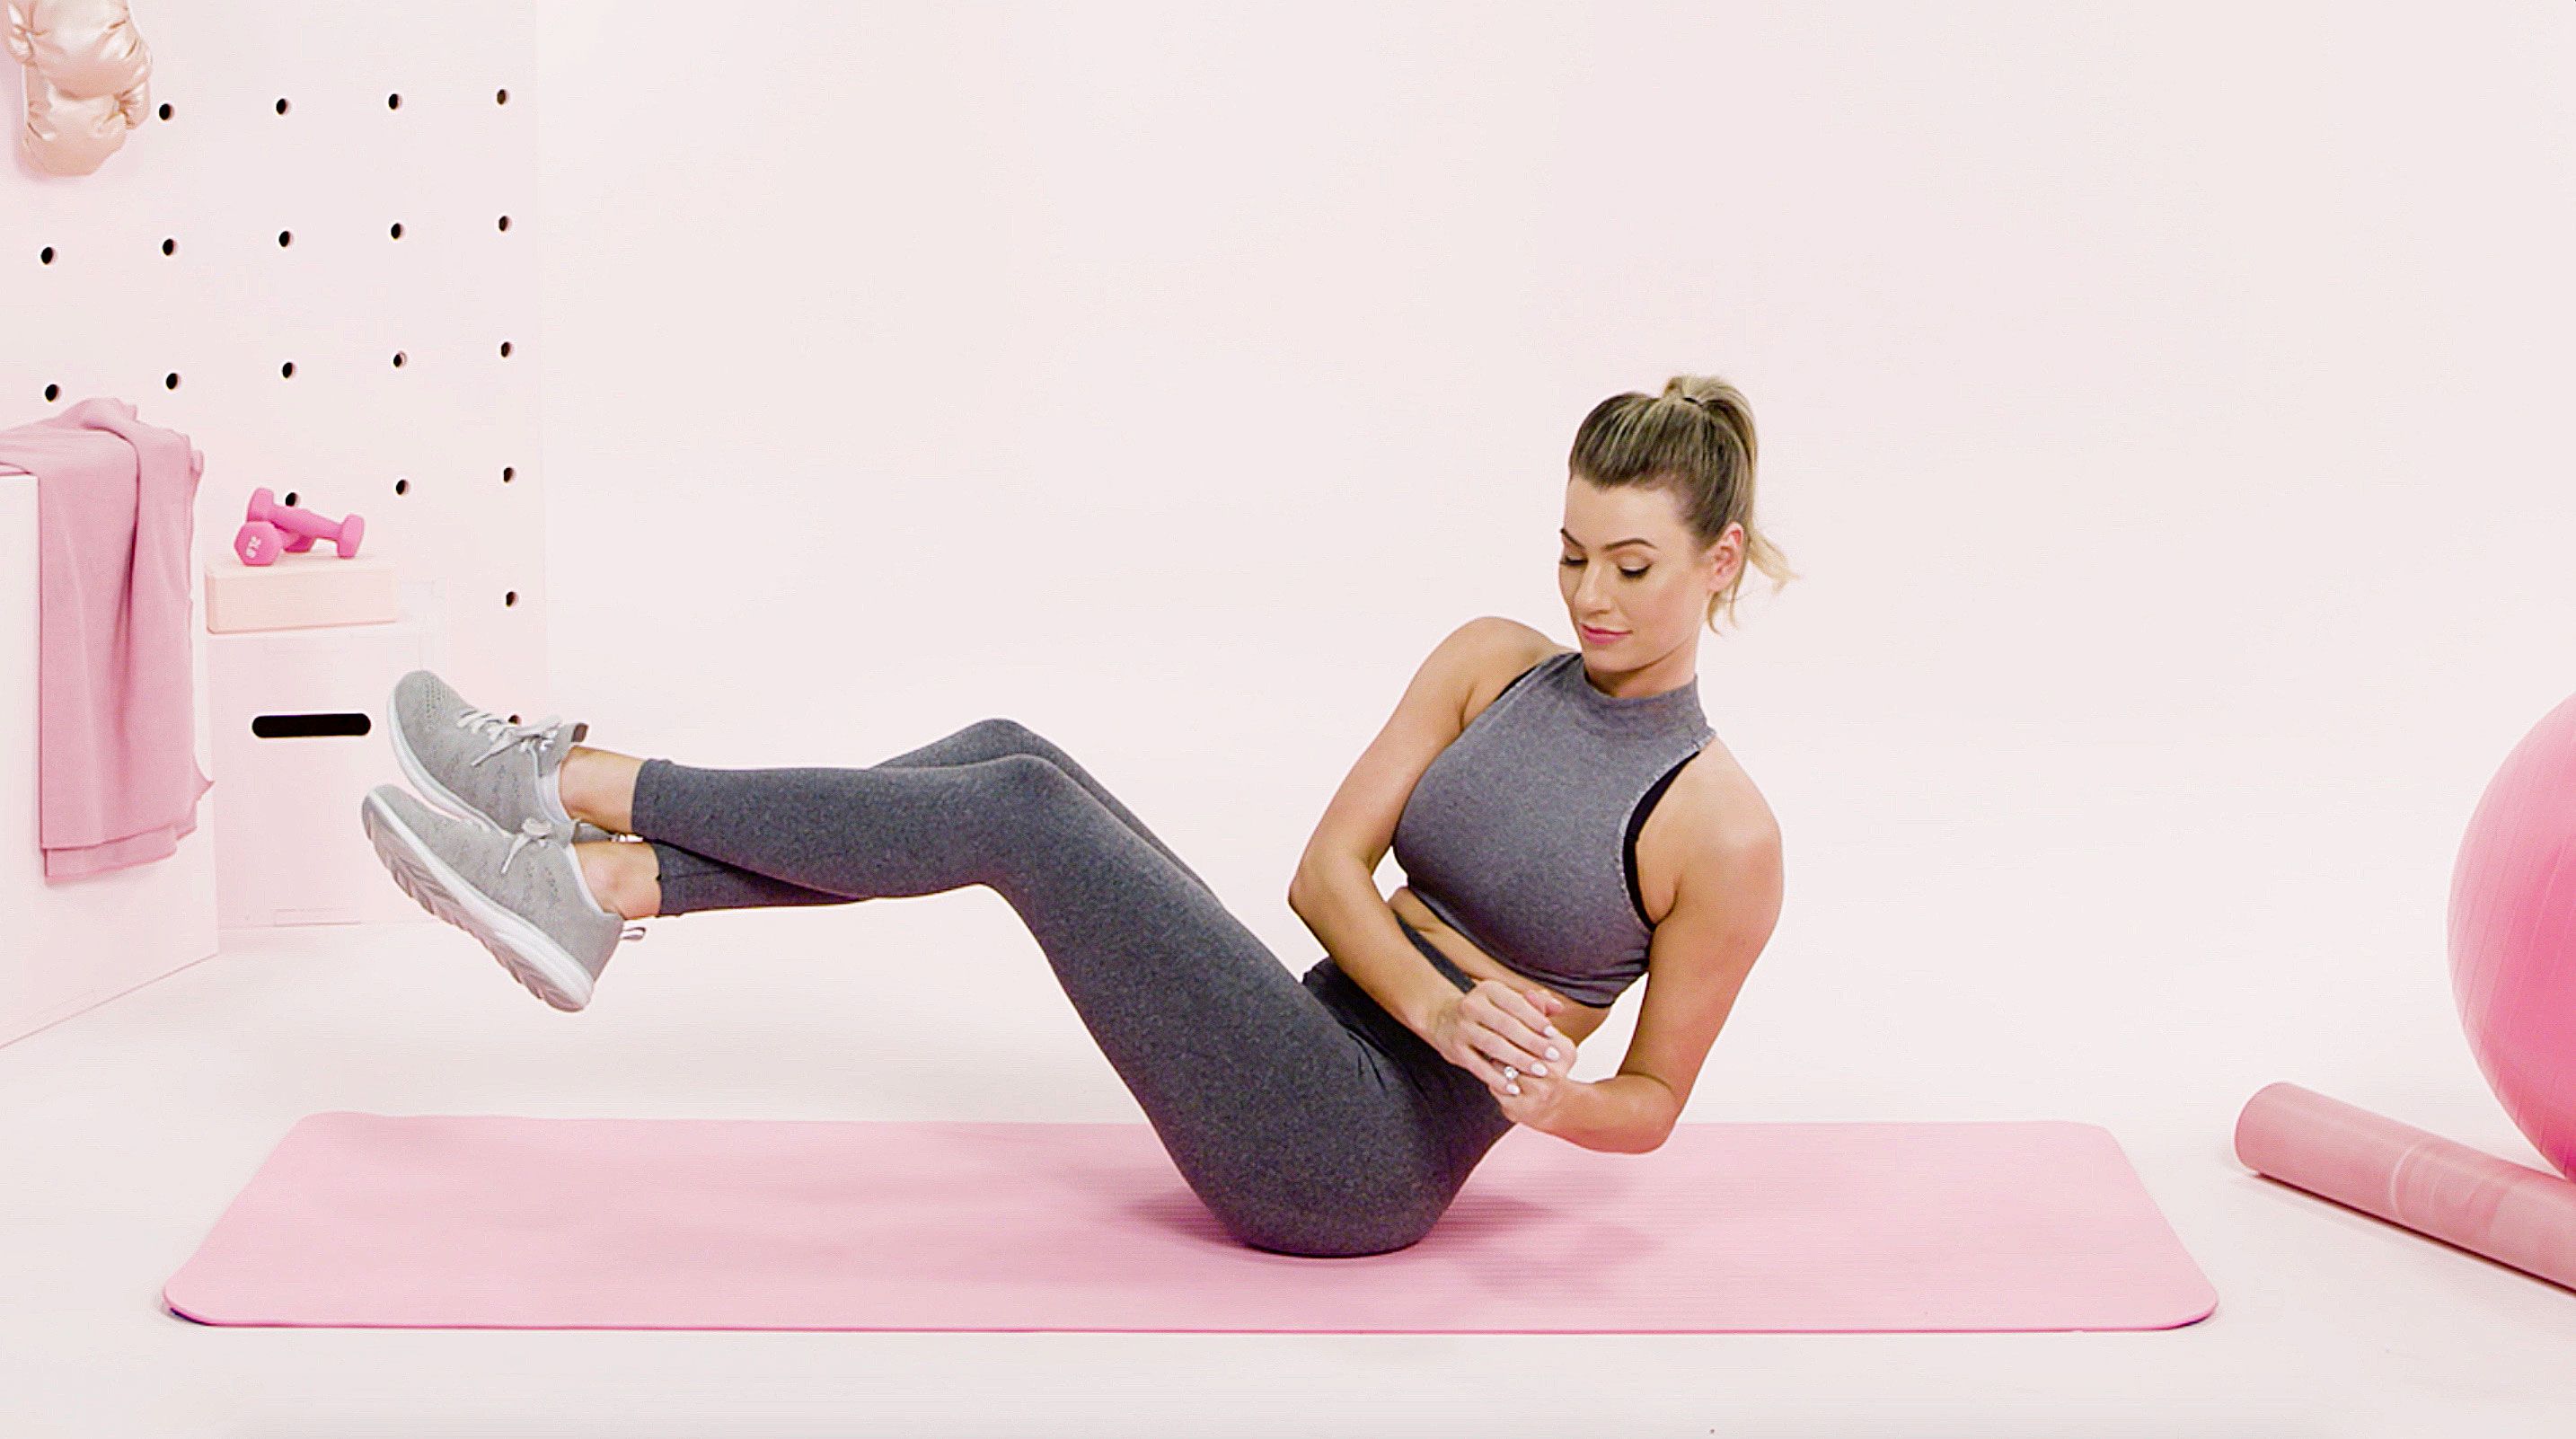 How To Do A Russian Twist For A Strong Core, According To Trainers